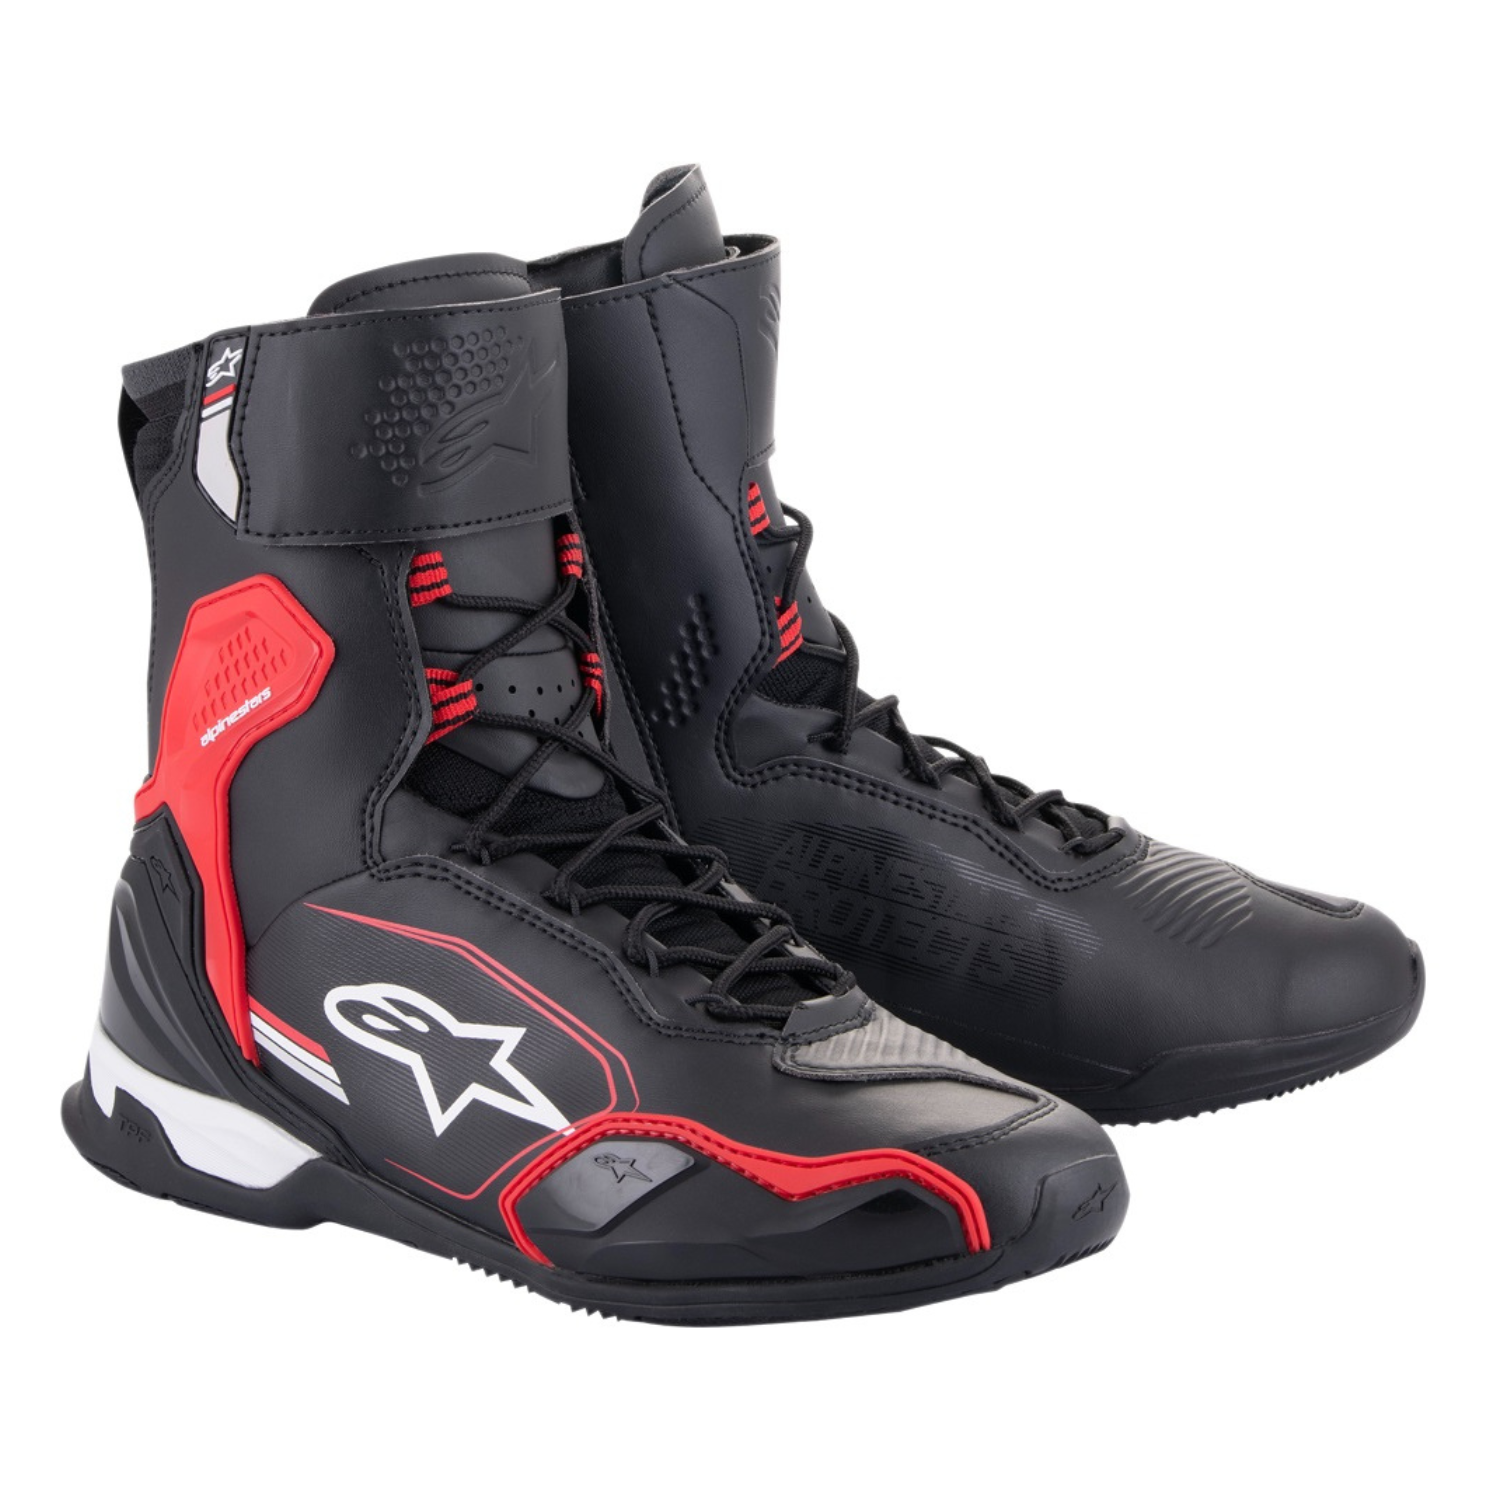 Image of Alpinestars Superfaster Shoes Black Bright Red White Talla US 65